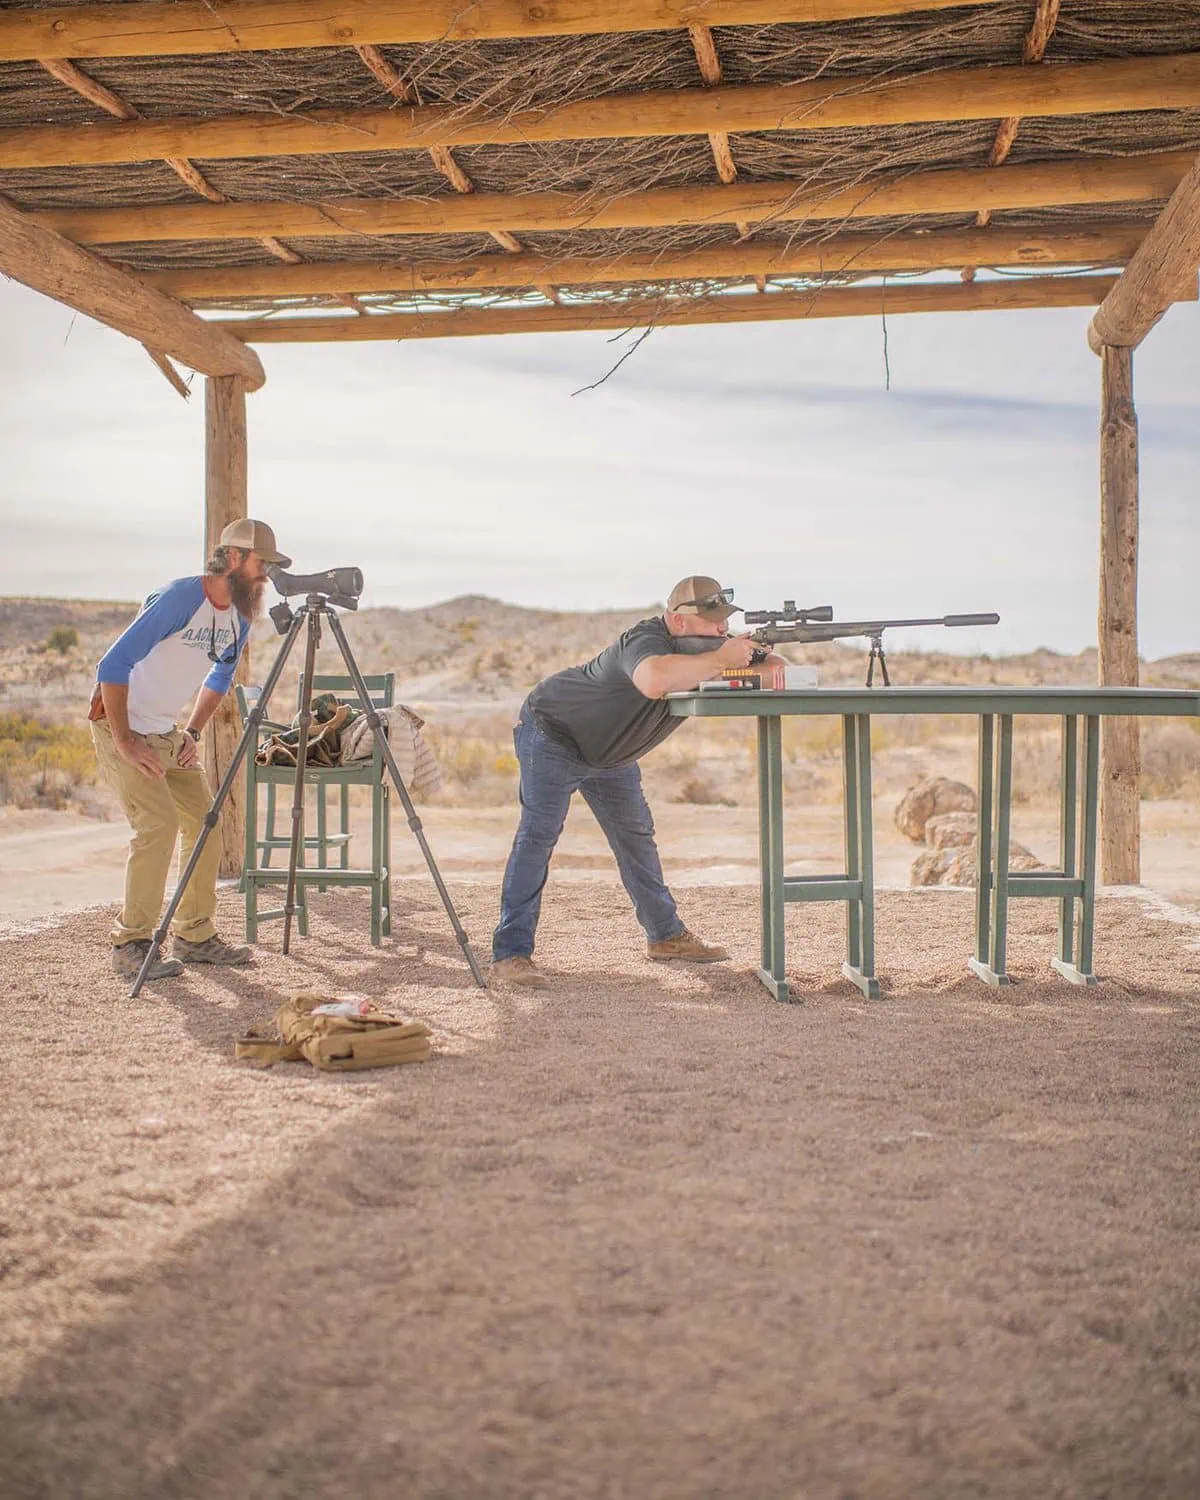 Nate day shooting the gunwerks rifle system at cibolo creek texas ranch for couples getaway